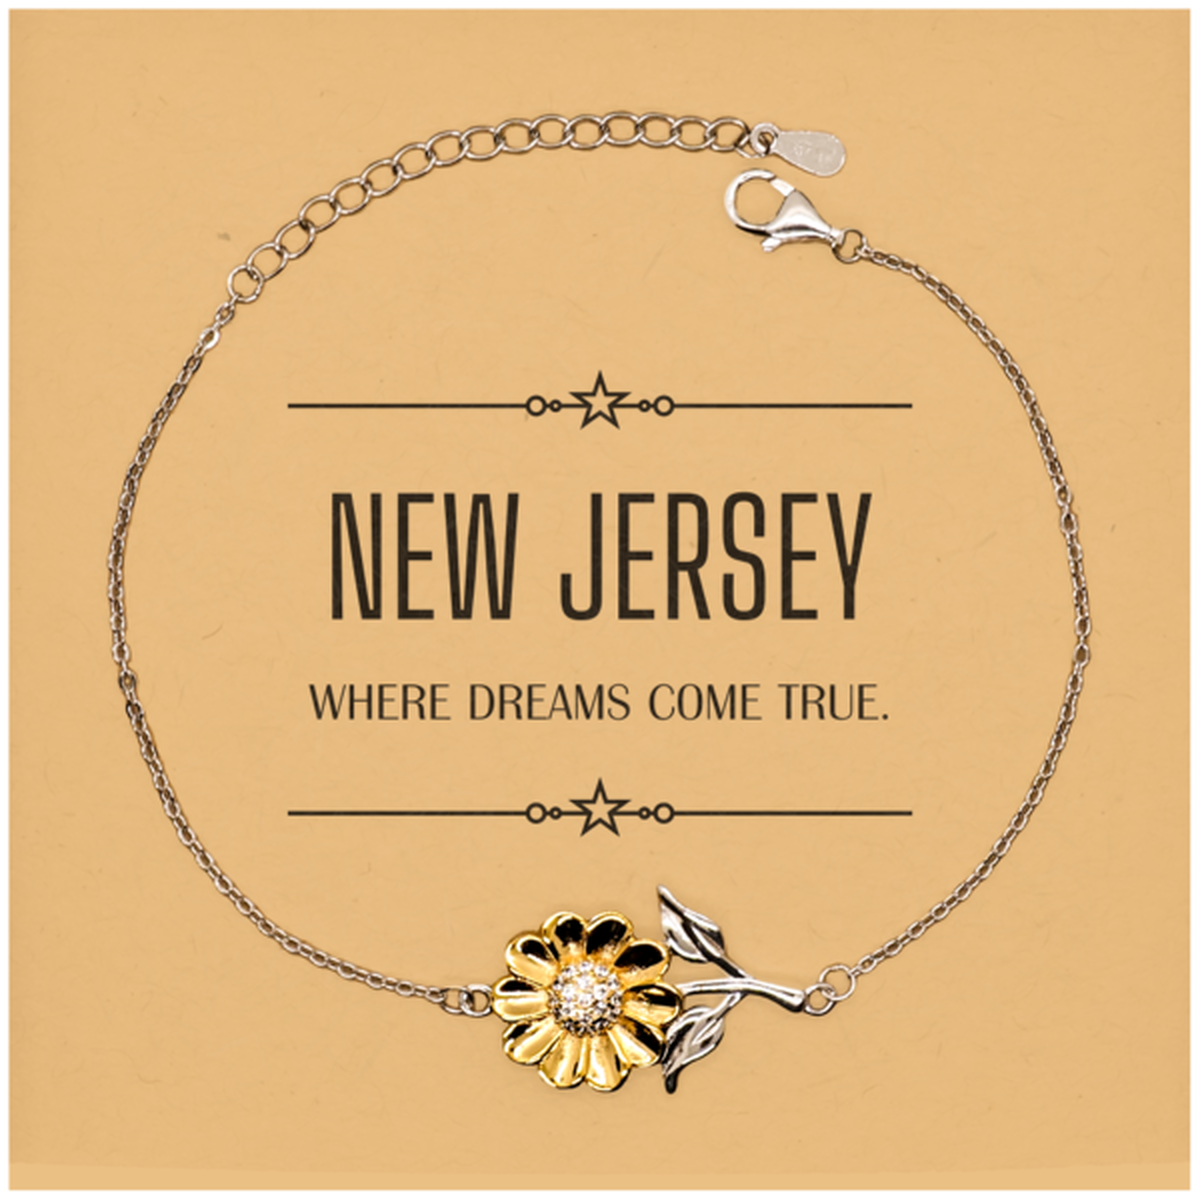 Love New Jersey State Sunflower Bracelet, New Jersey Where dreams come true, Birthday Christmas Inspirational Gifts For New Jersey Men, Women, Friends